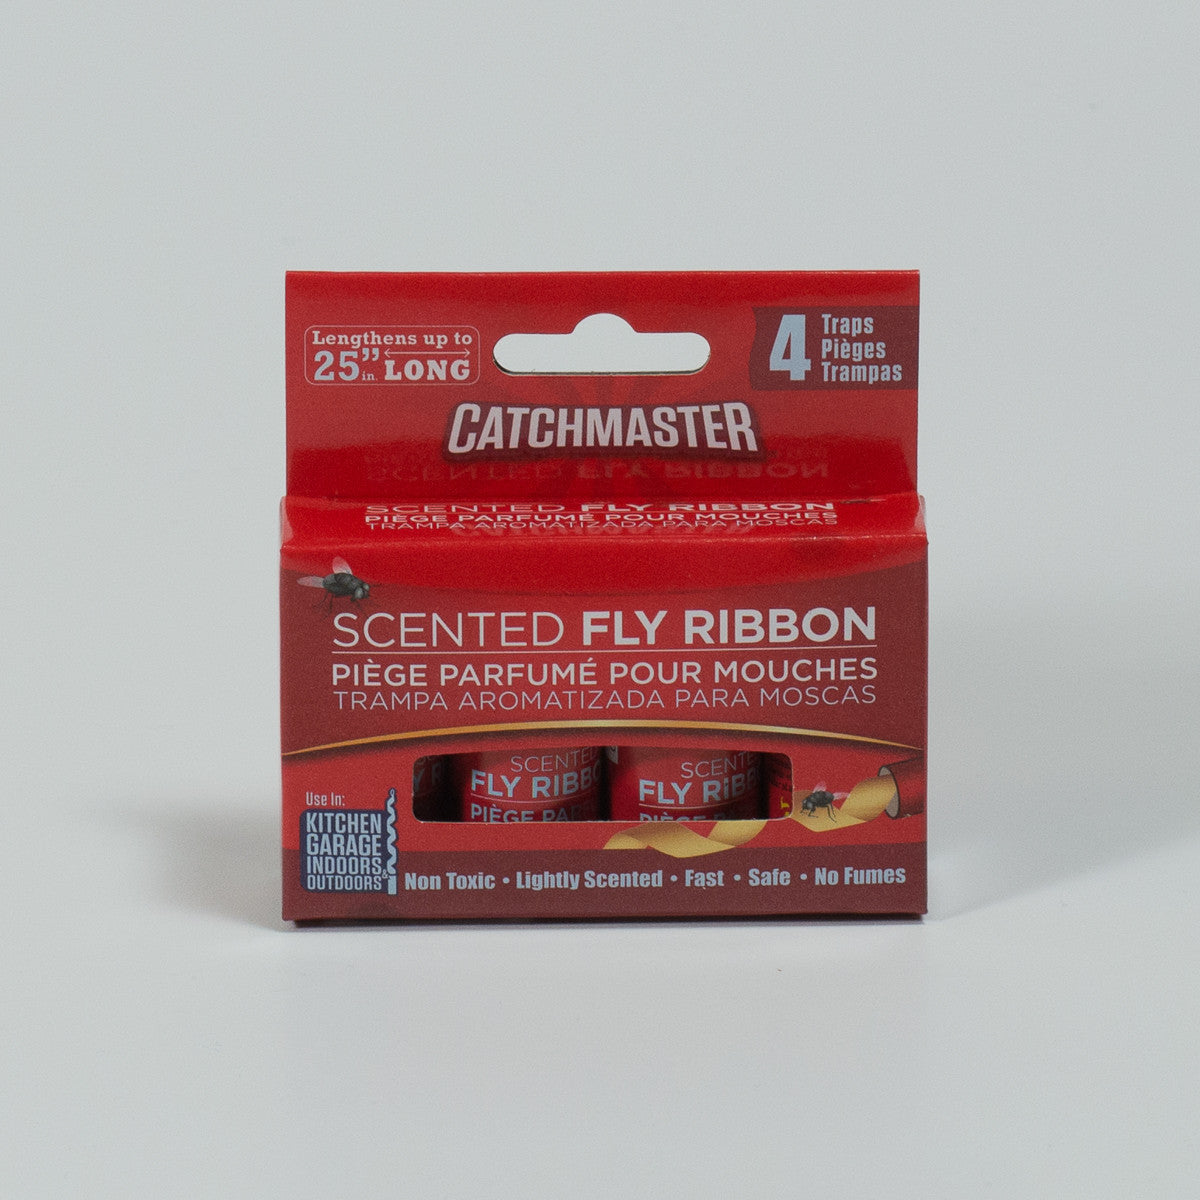 Scented Fly Ribbon - 4 Pack